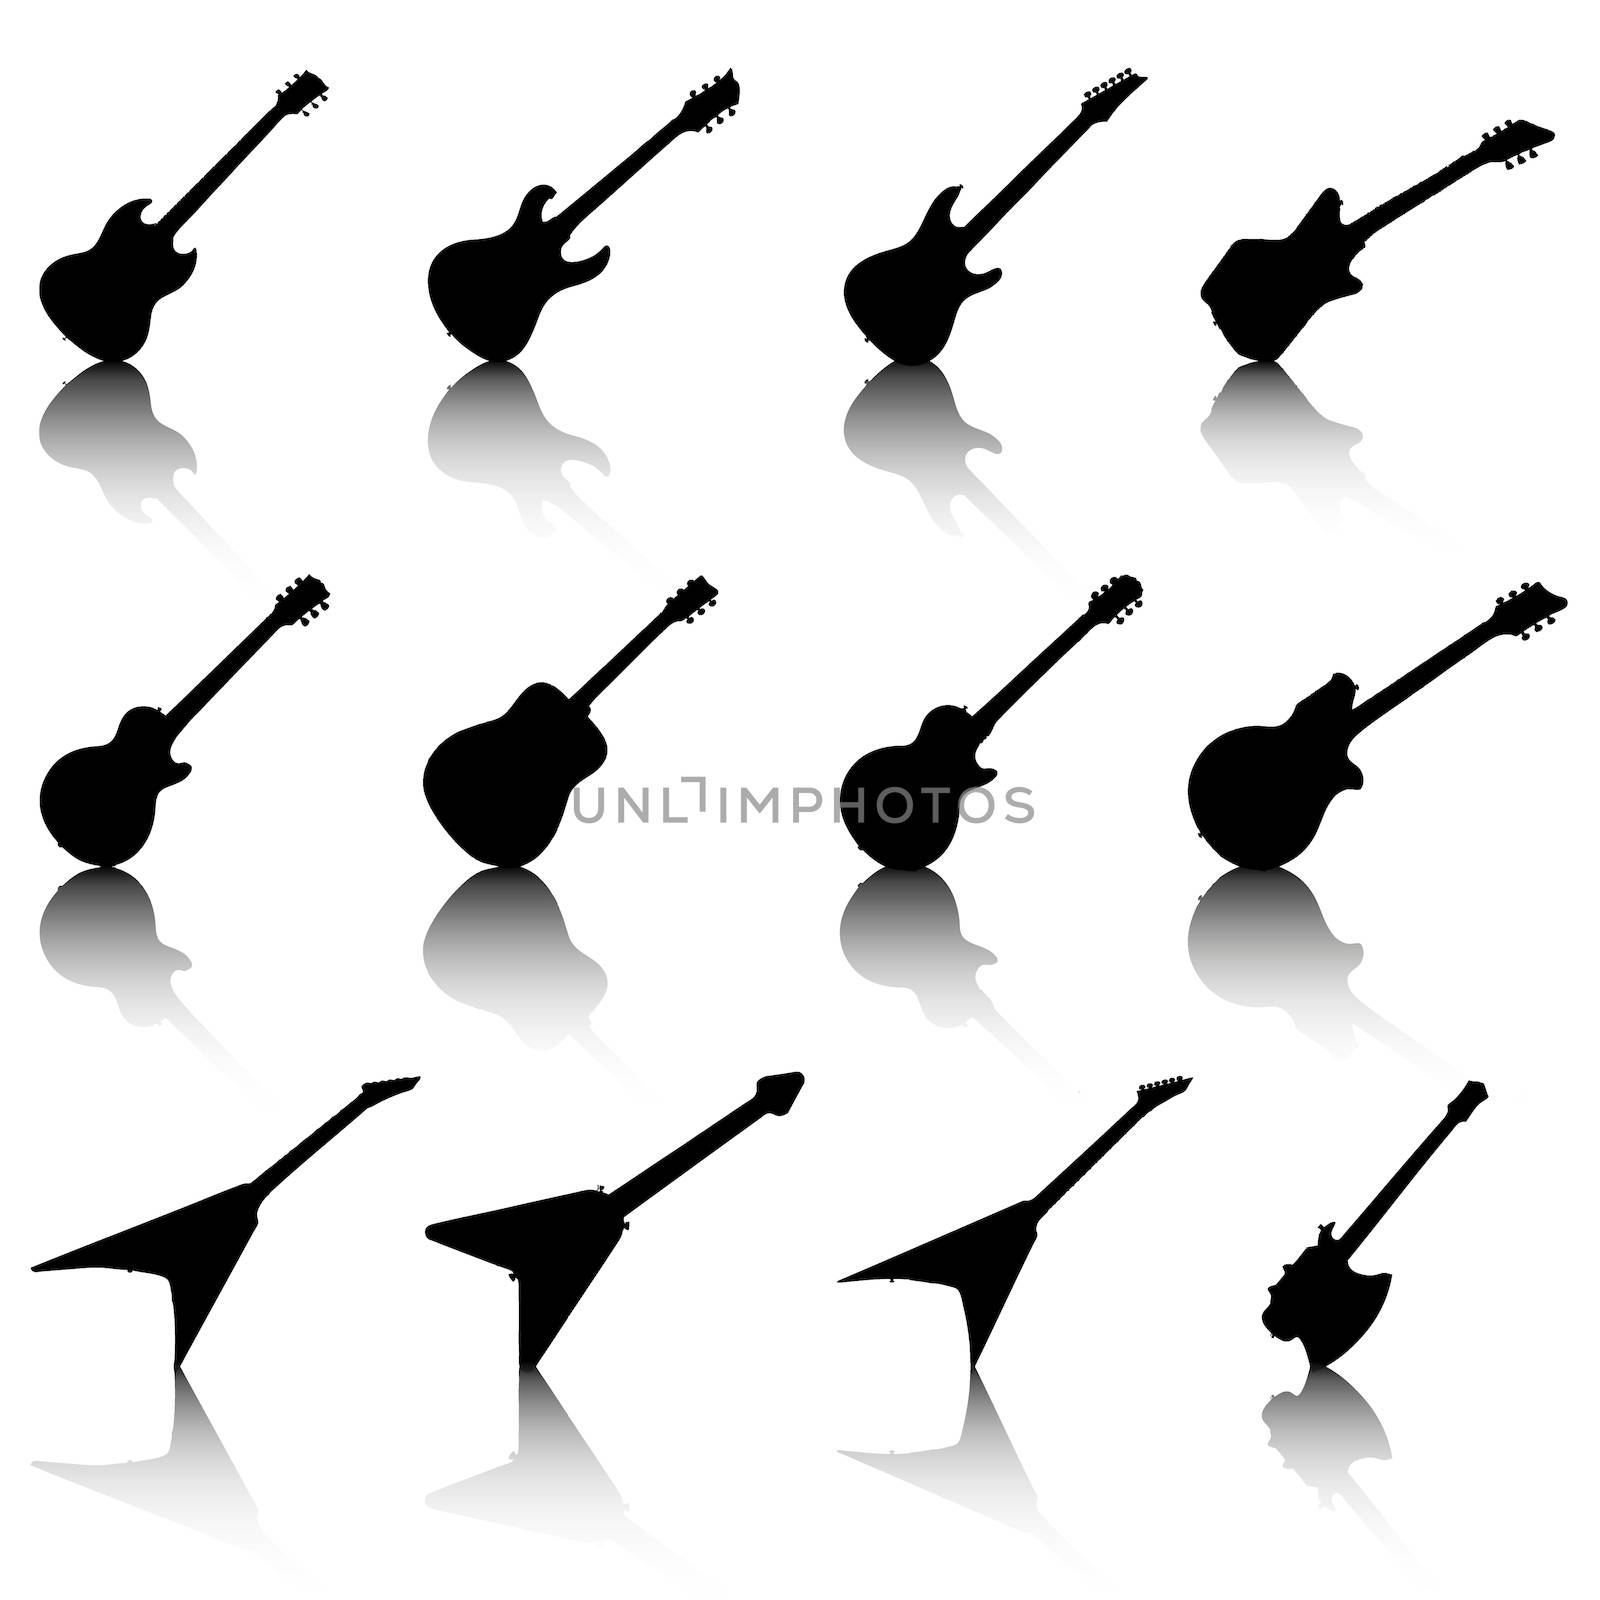 An Illustration of guitar silhouette